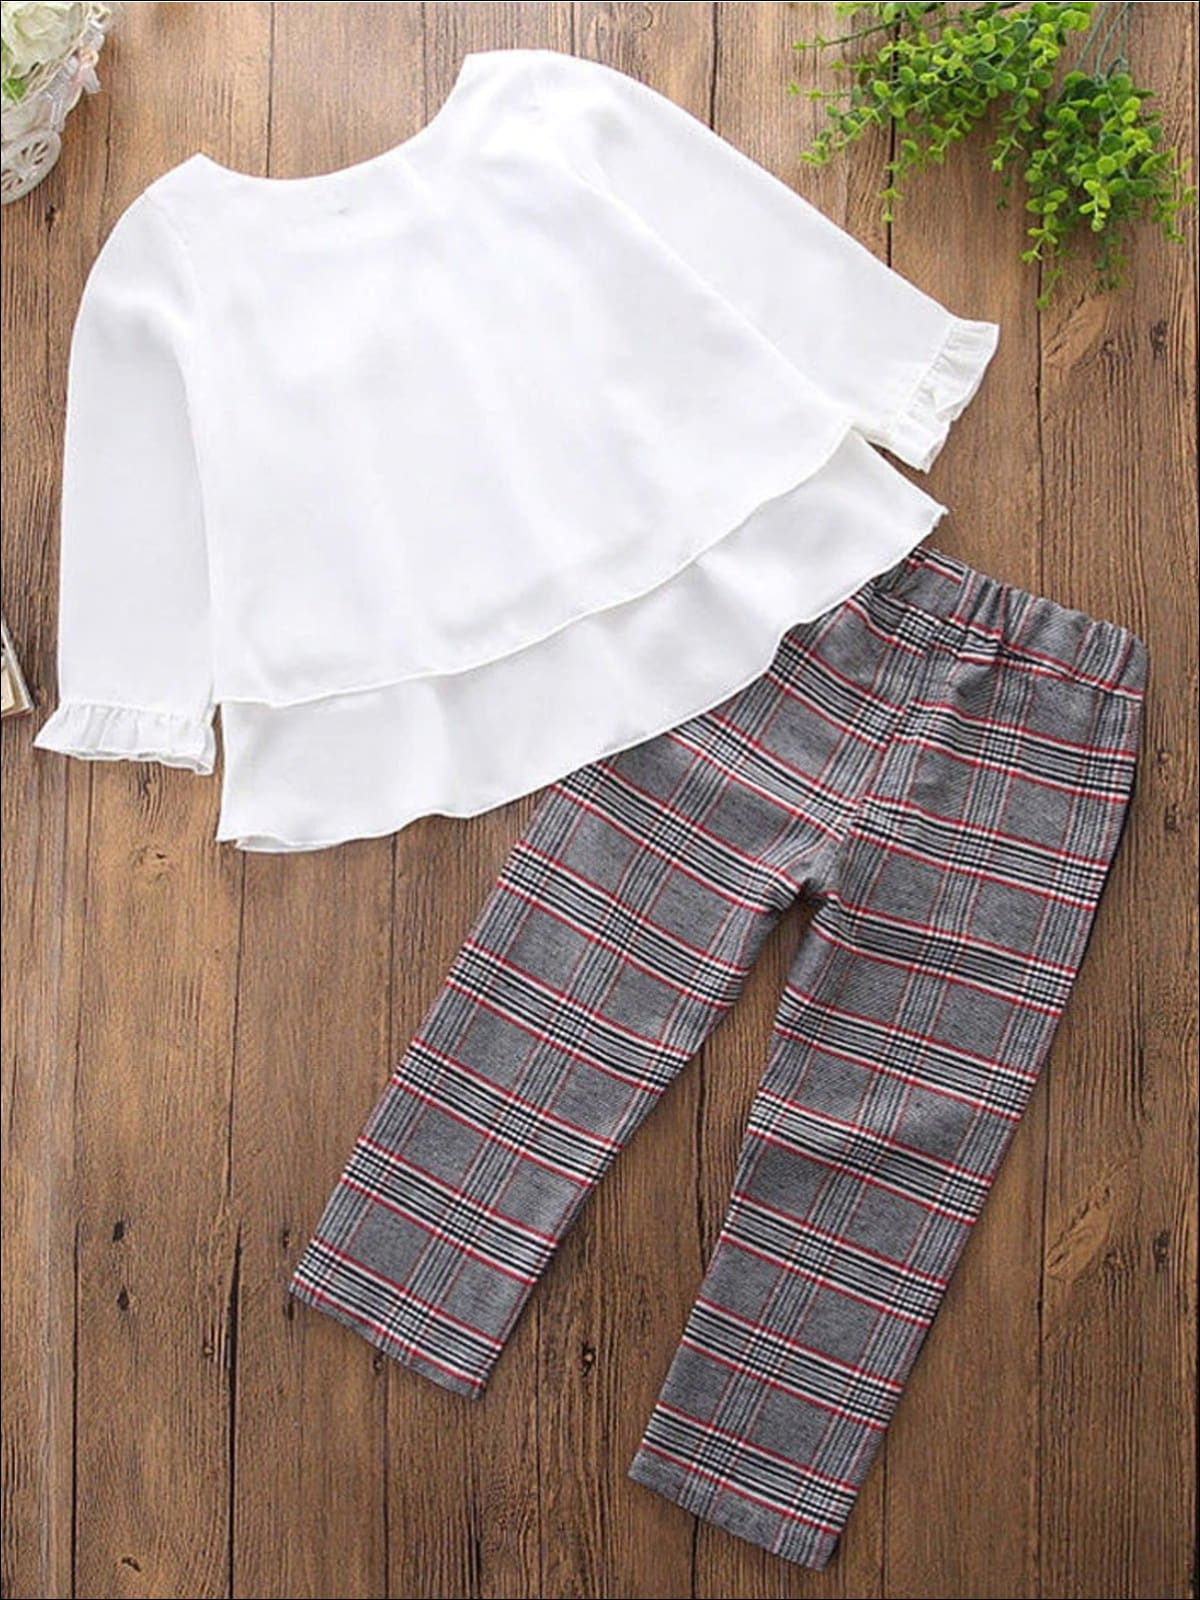 Girls Preppy White Long Sleeve Layered Ruffle Blouse With Ribbon & Plaid Trousers Set - Girls Fall Casual Set